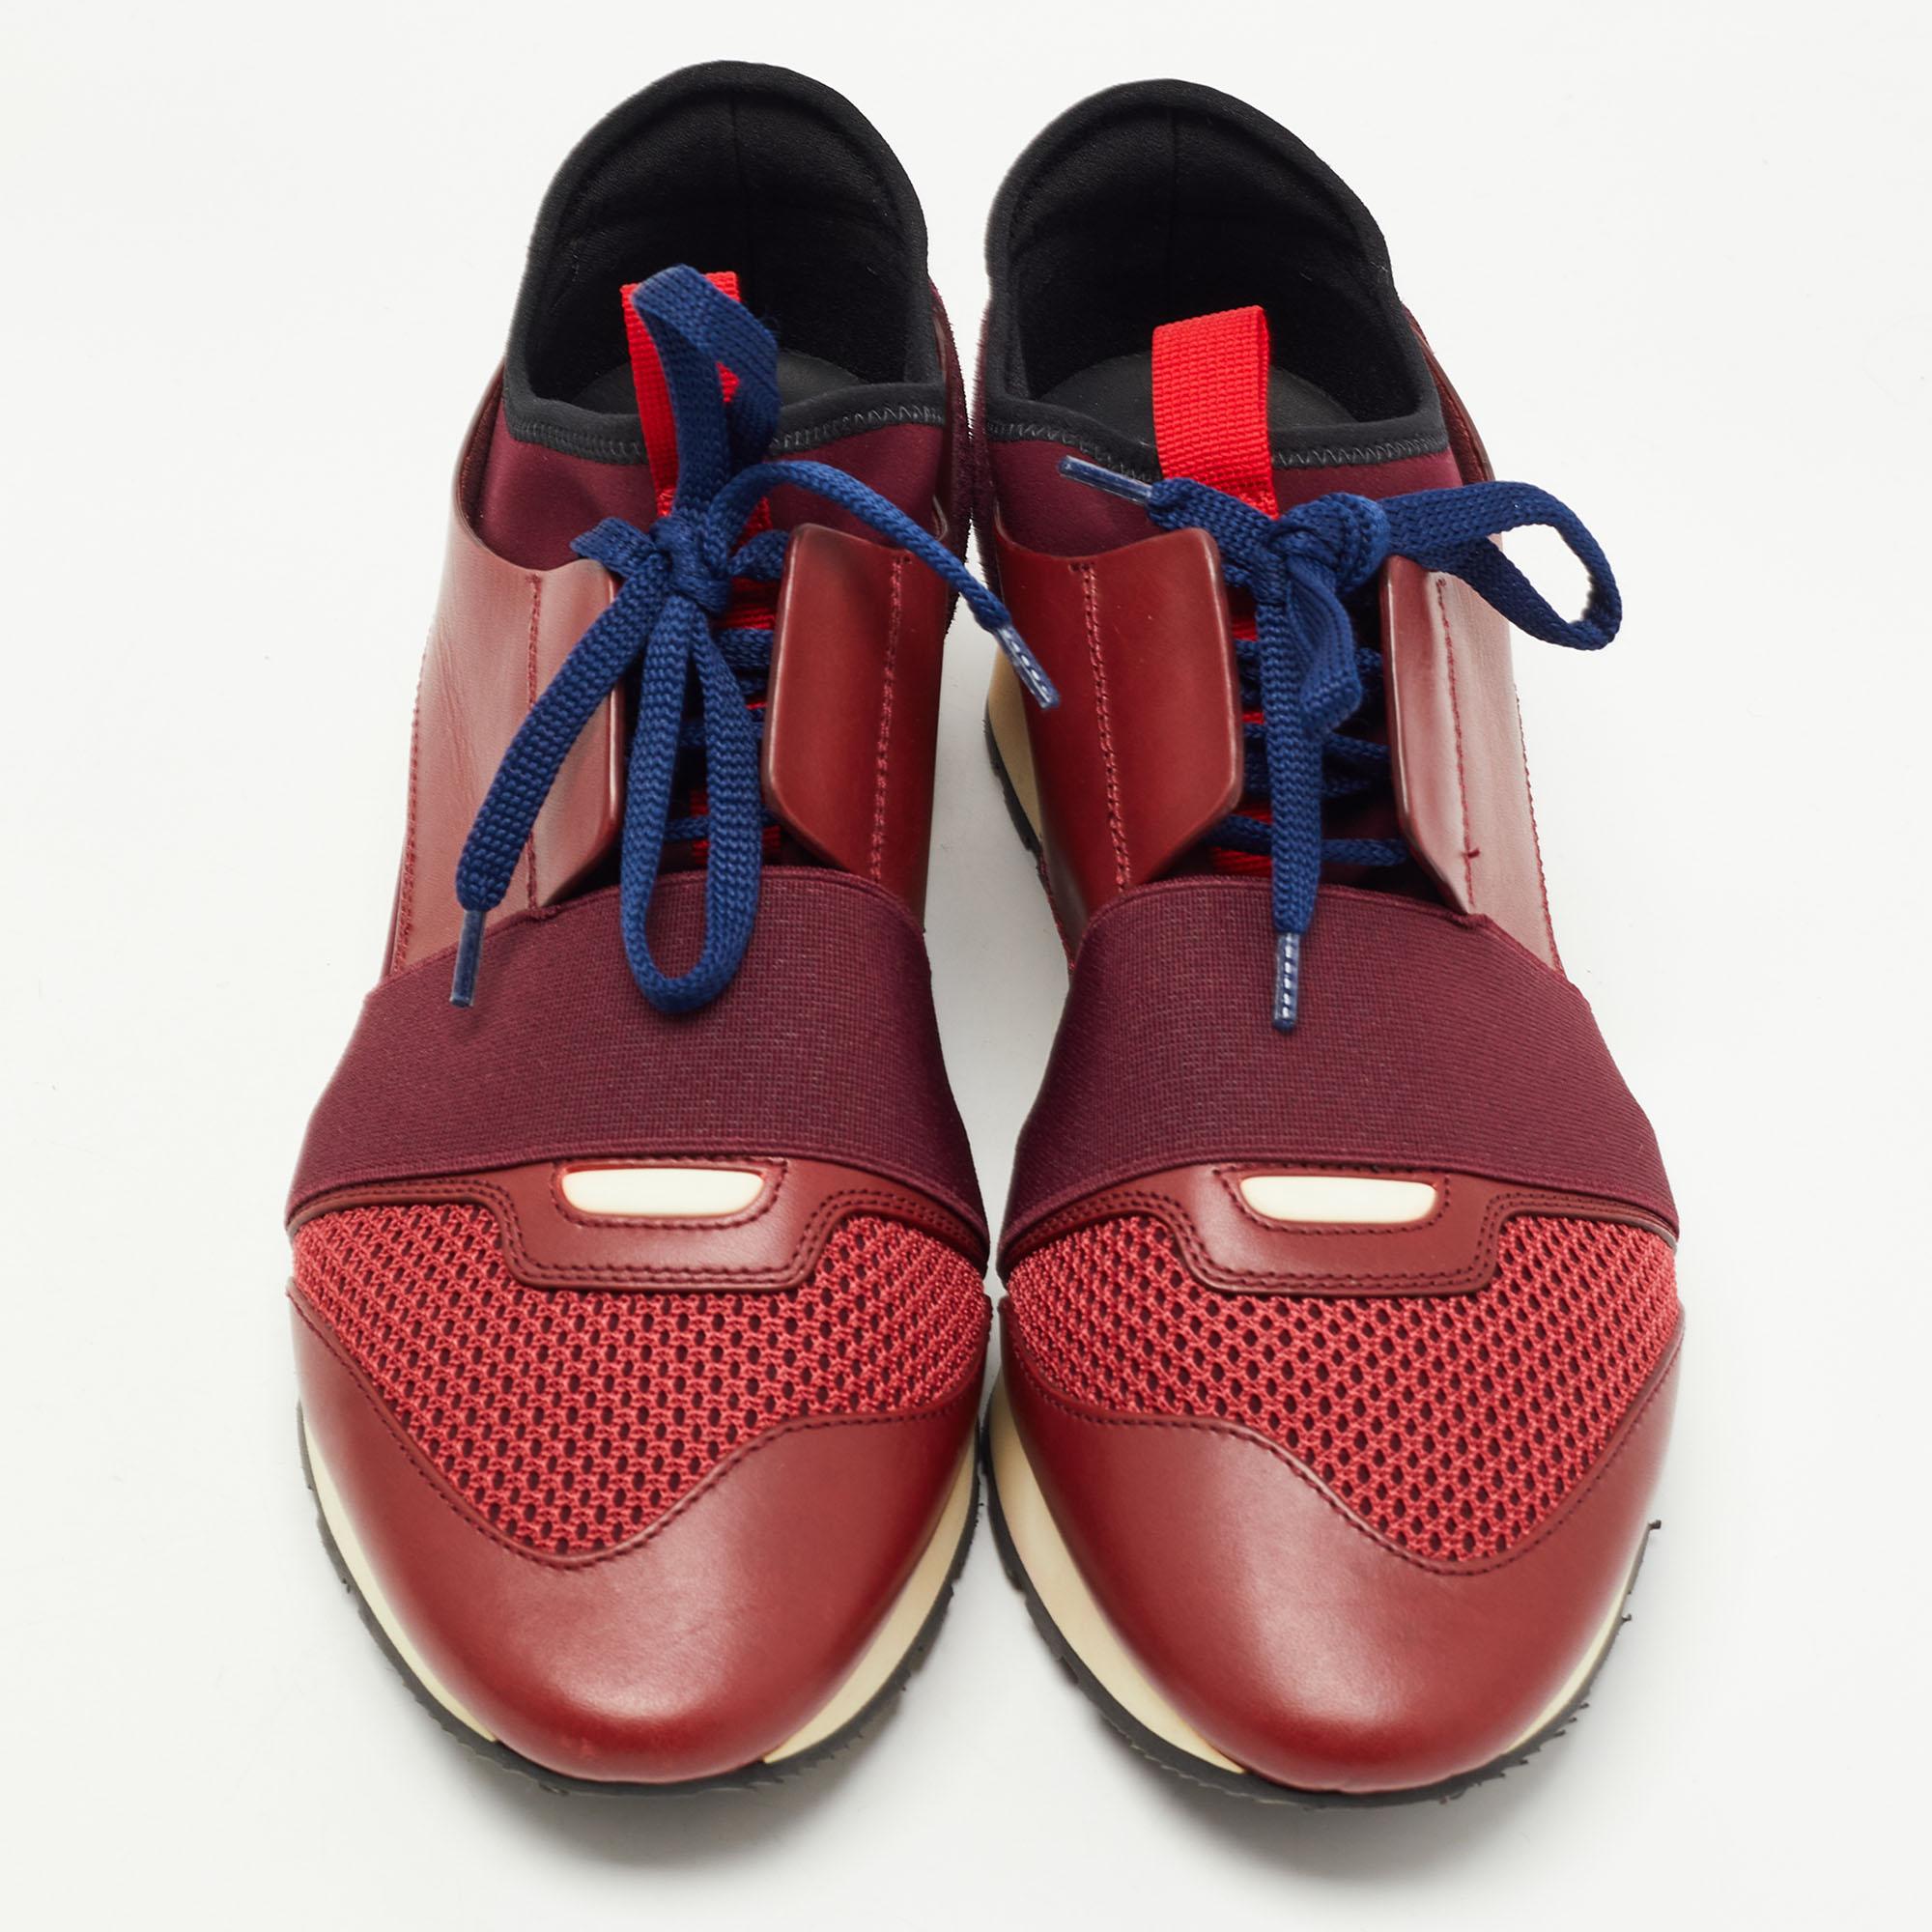 Let your latest shoe addition be this pair of Race Runners sneakers from Balenciaga. These burgundy sneakers have been crafted from suede along with leather and feature a chic silhouette. They flaunt covered toes, strap detailing on the vamps, and